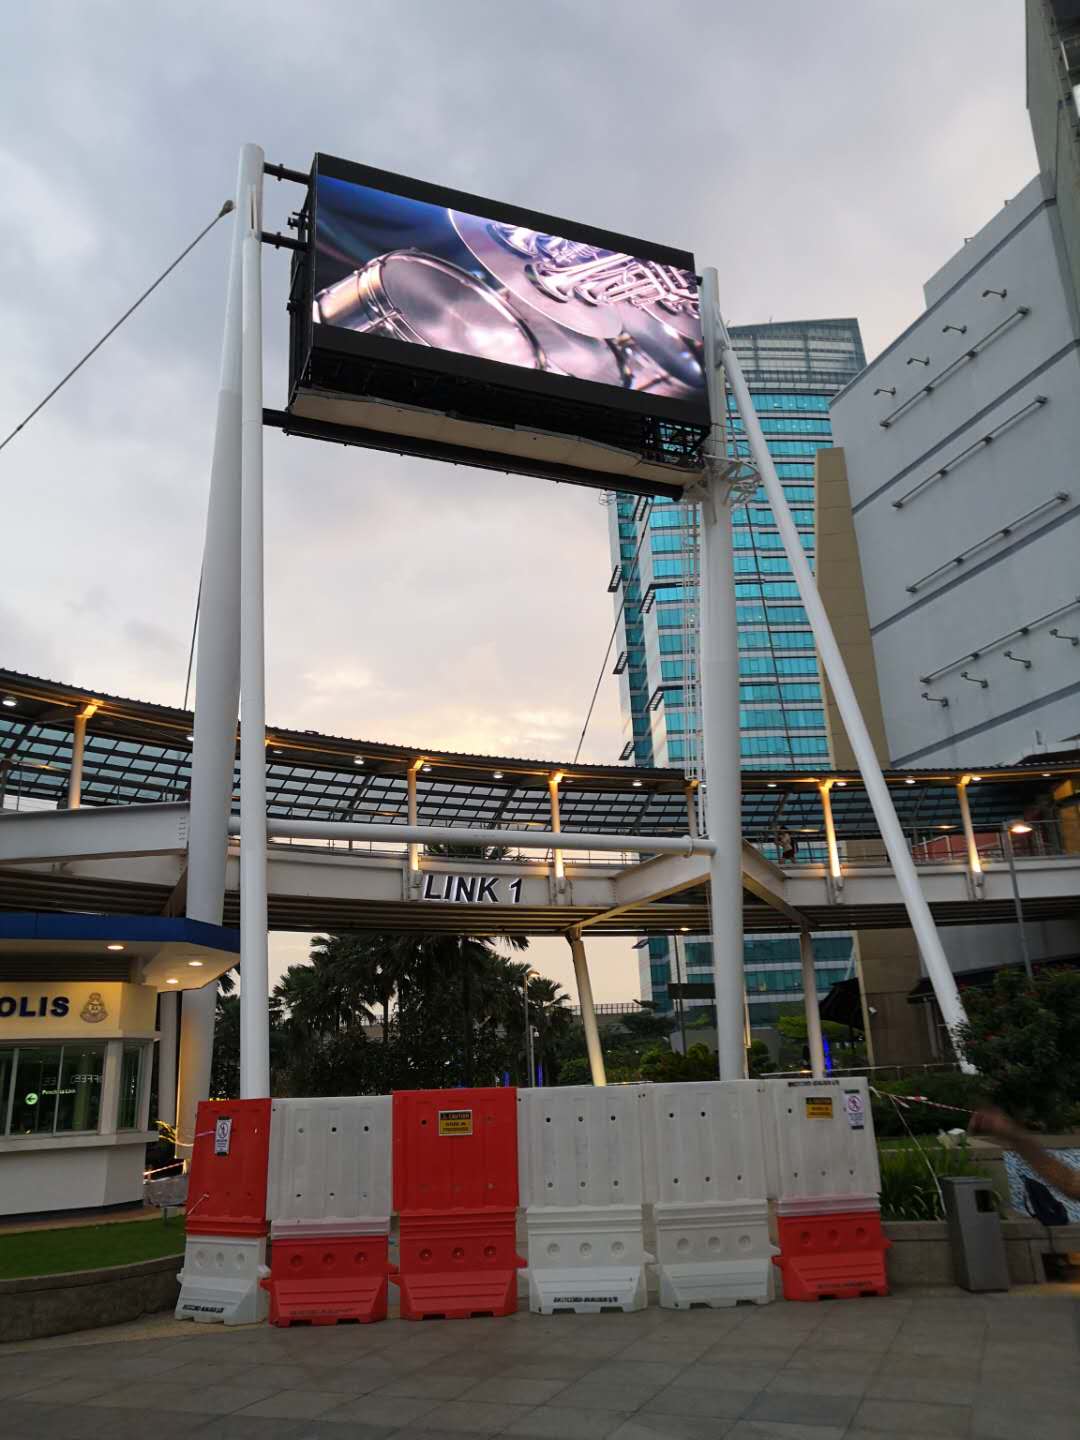 led-screen-digital-billboard-display-at-the-curve-kl-damansara-malaysia-double-sided-led-screen-full-color2_orig